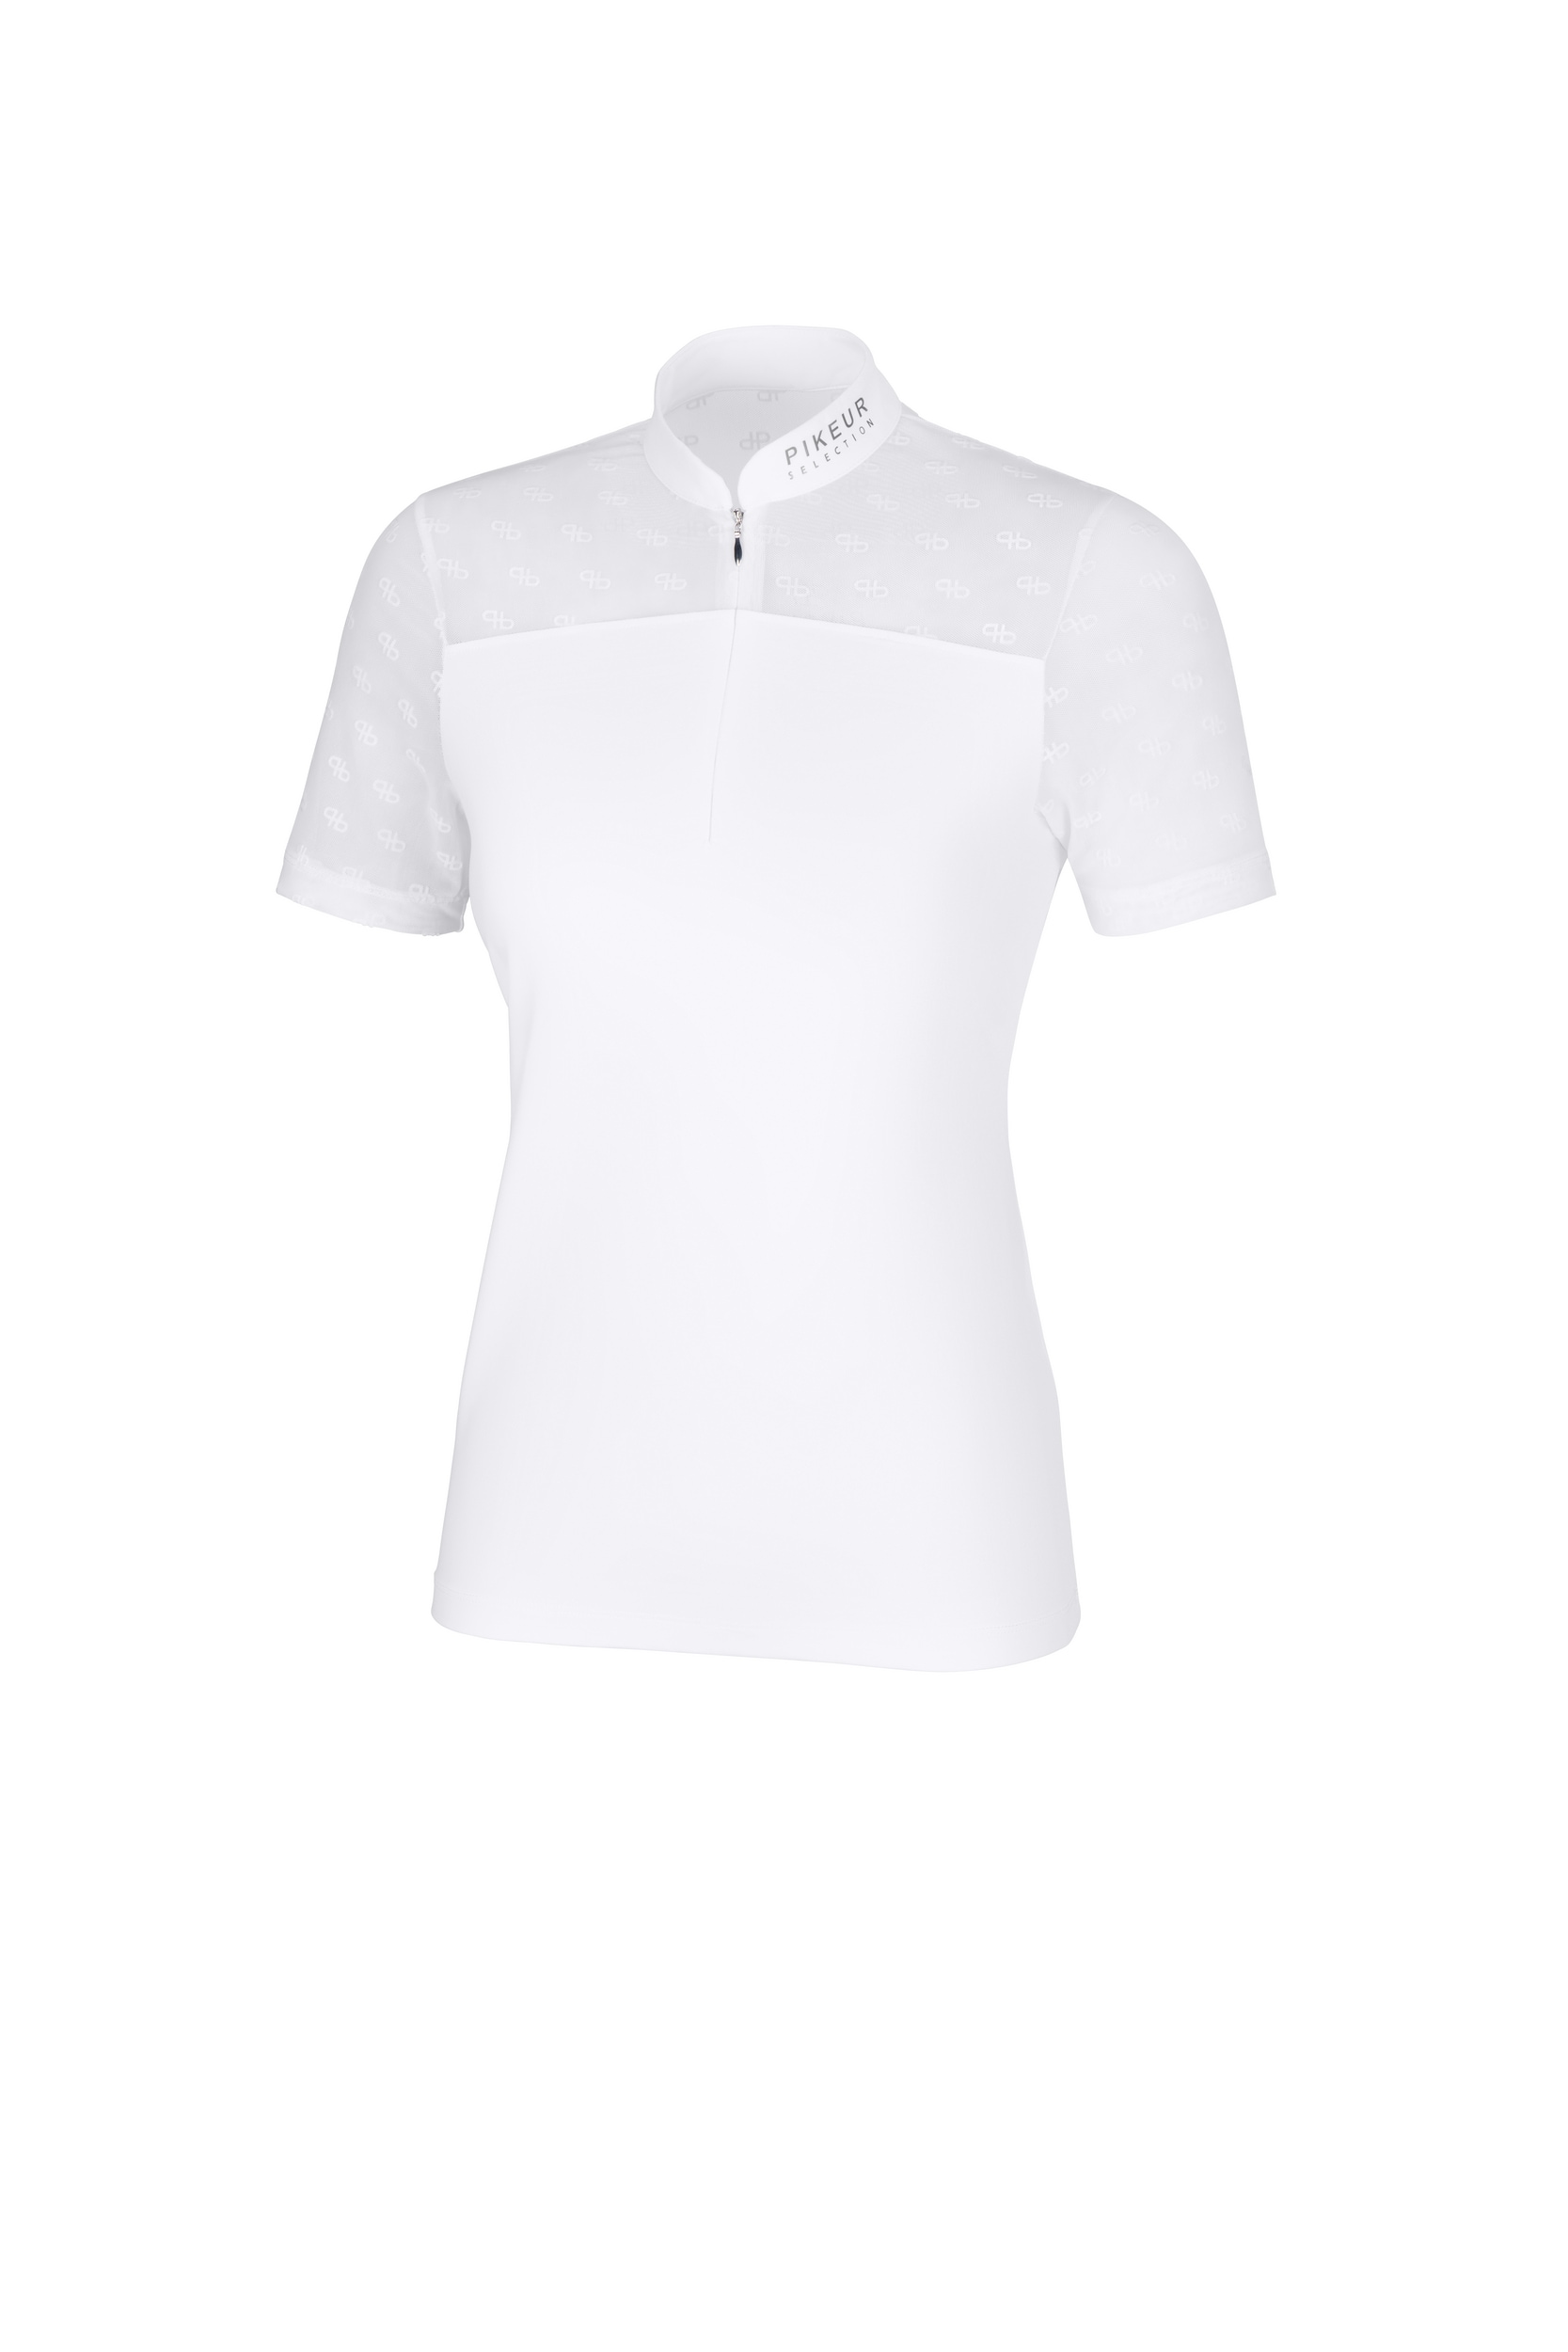 Competition shirt Zip - White